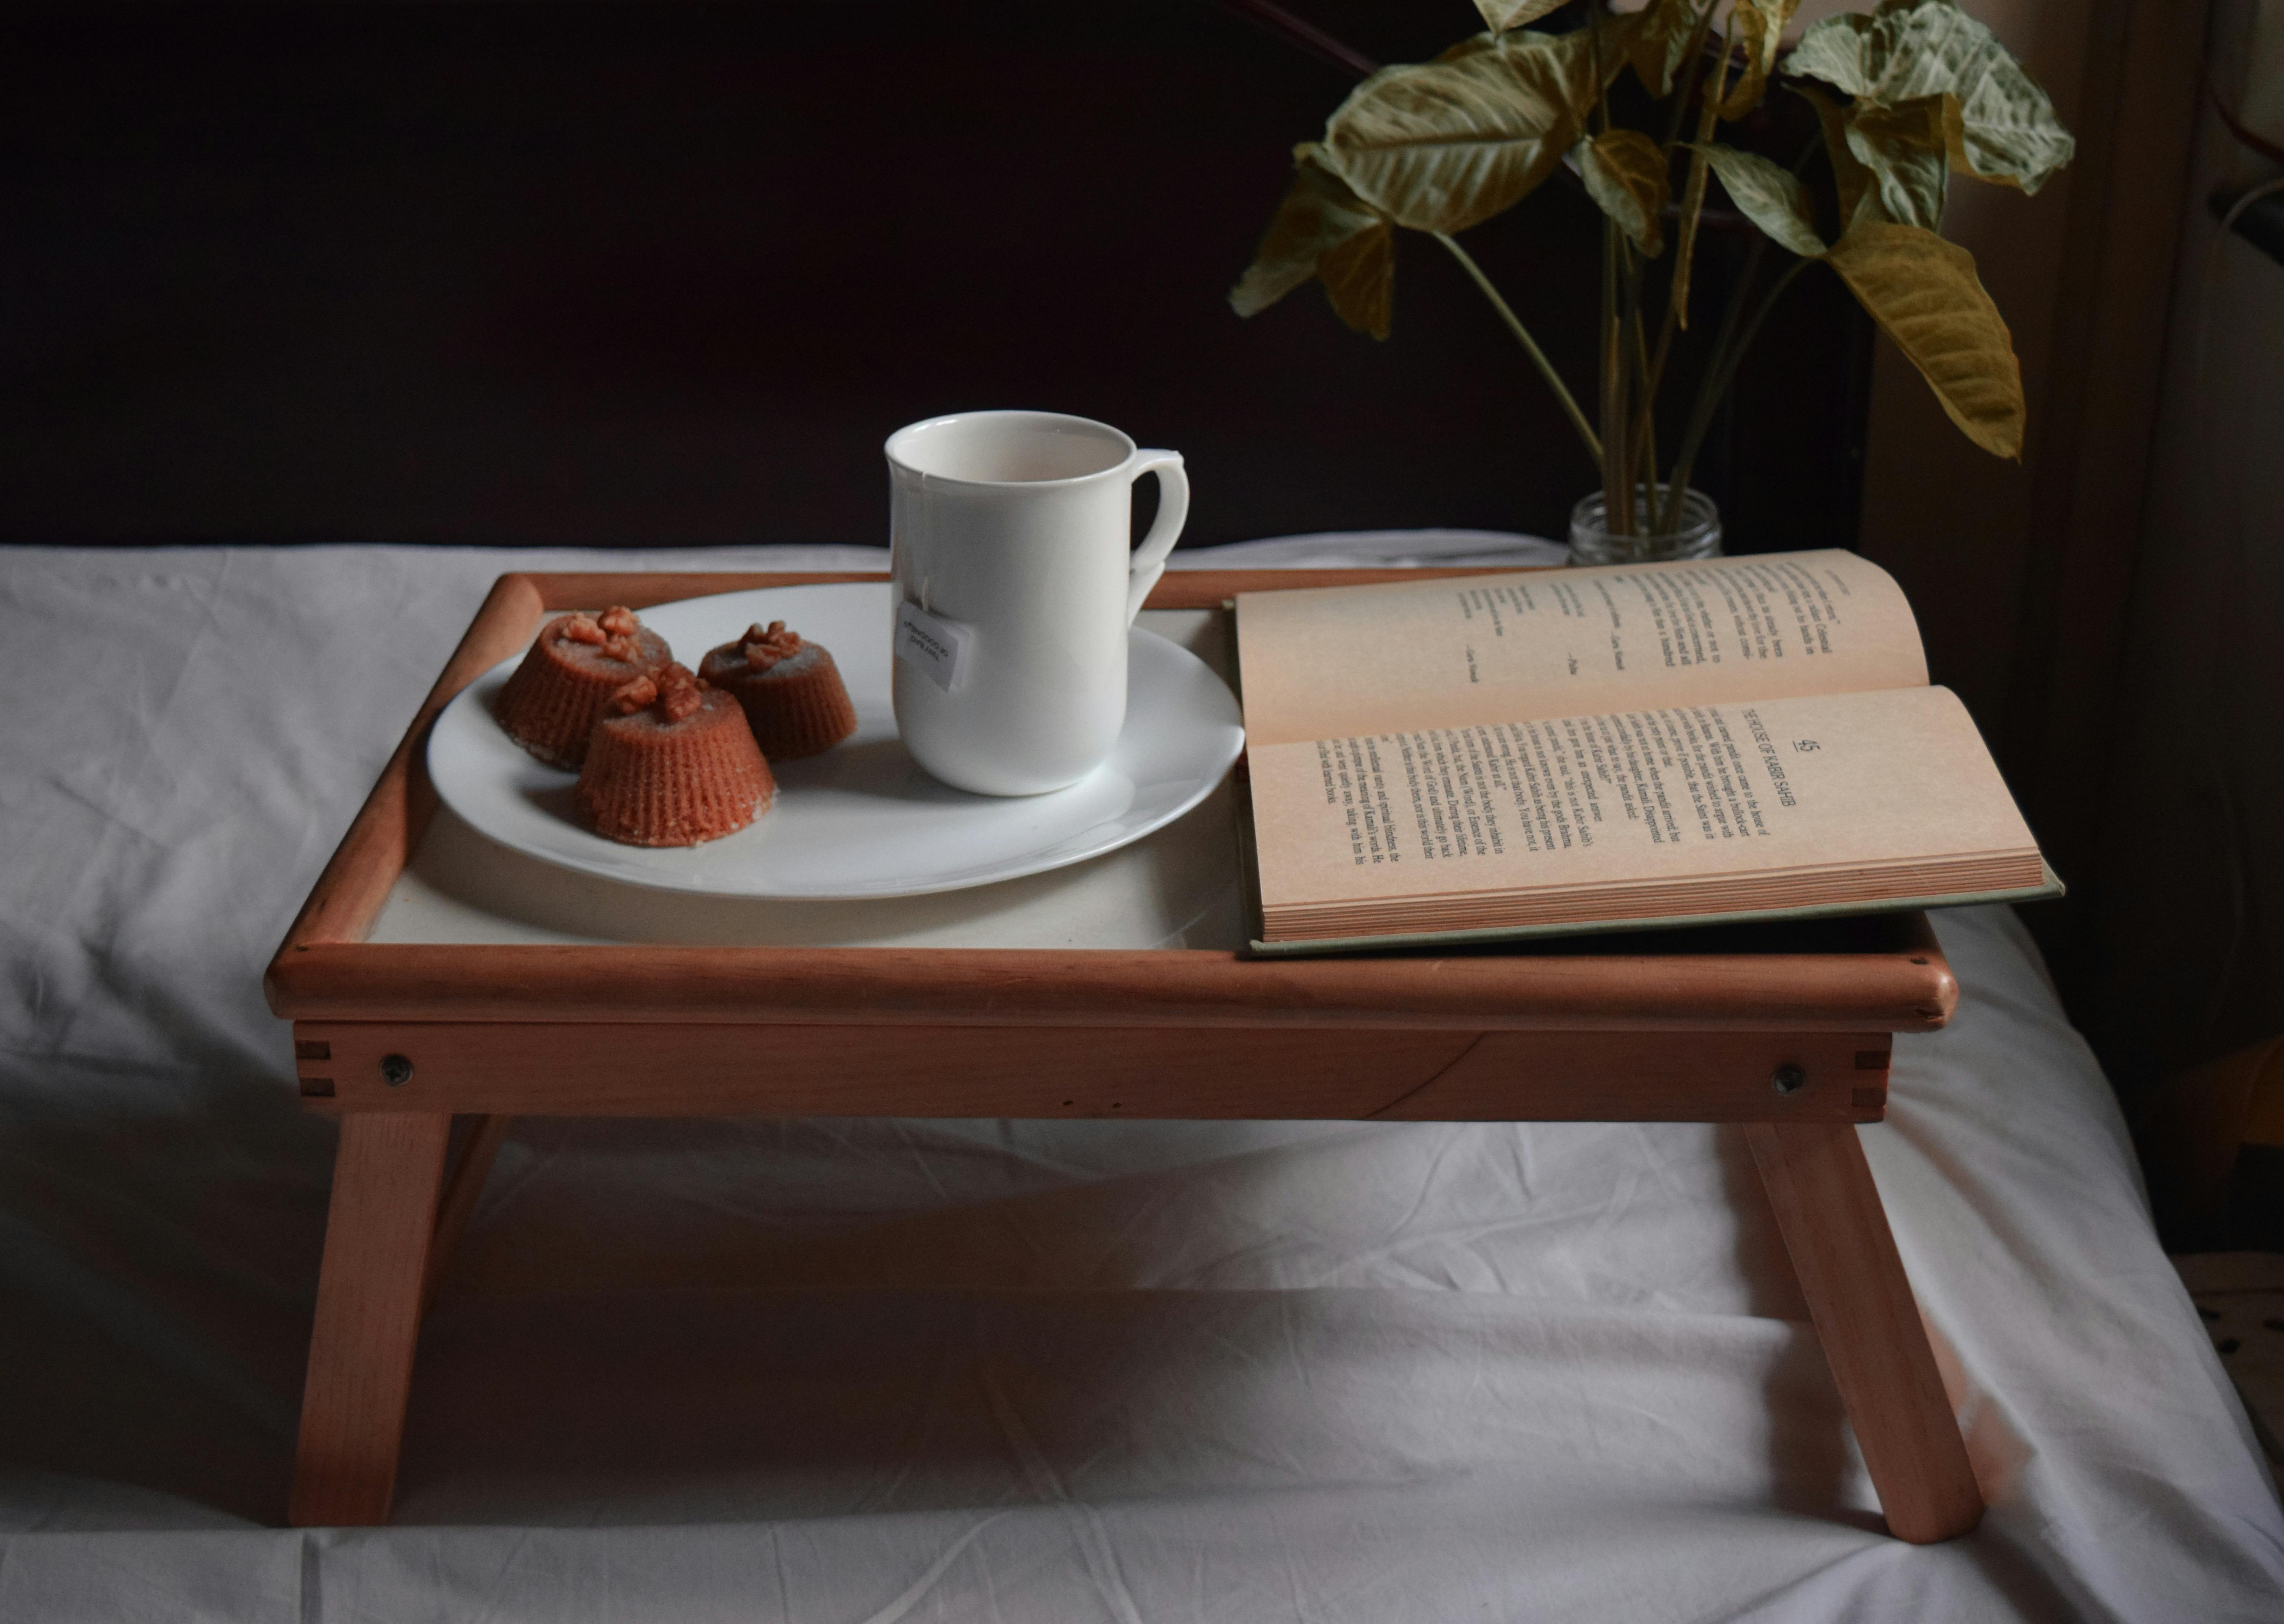 cup of tea and dessert near book on bed tray